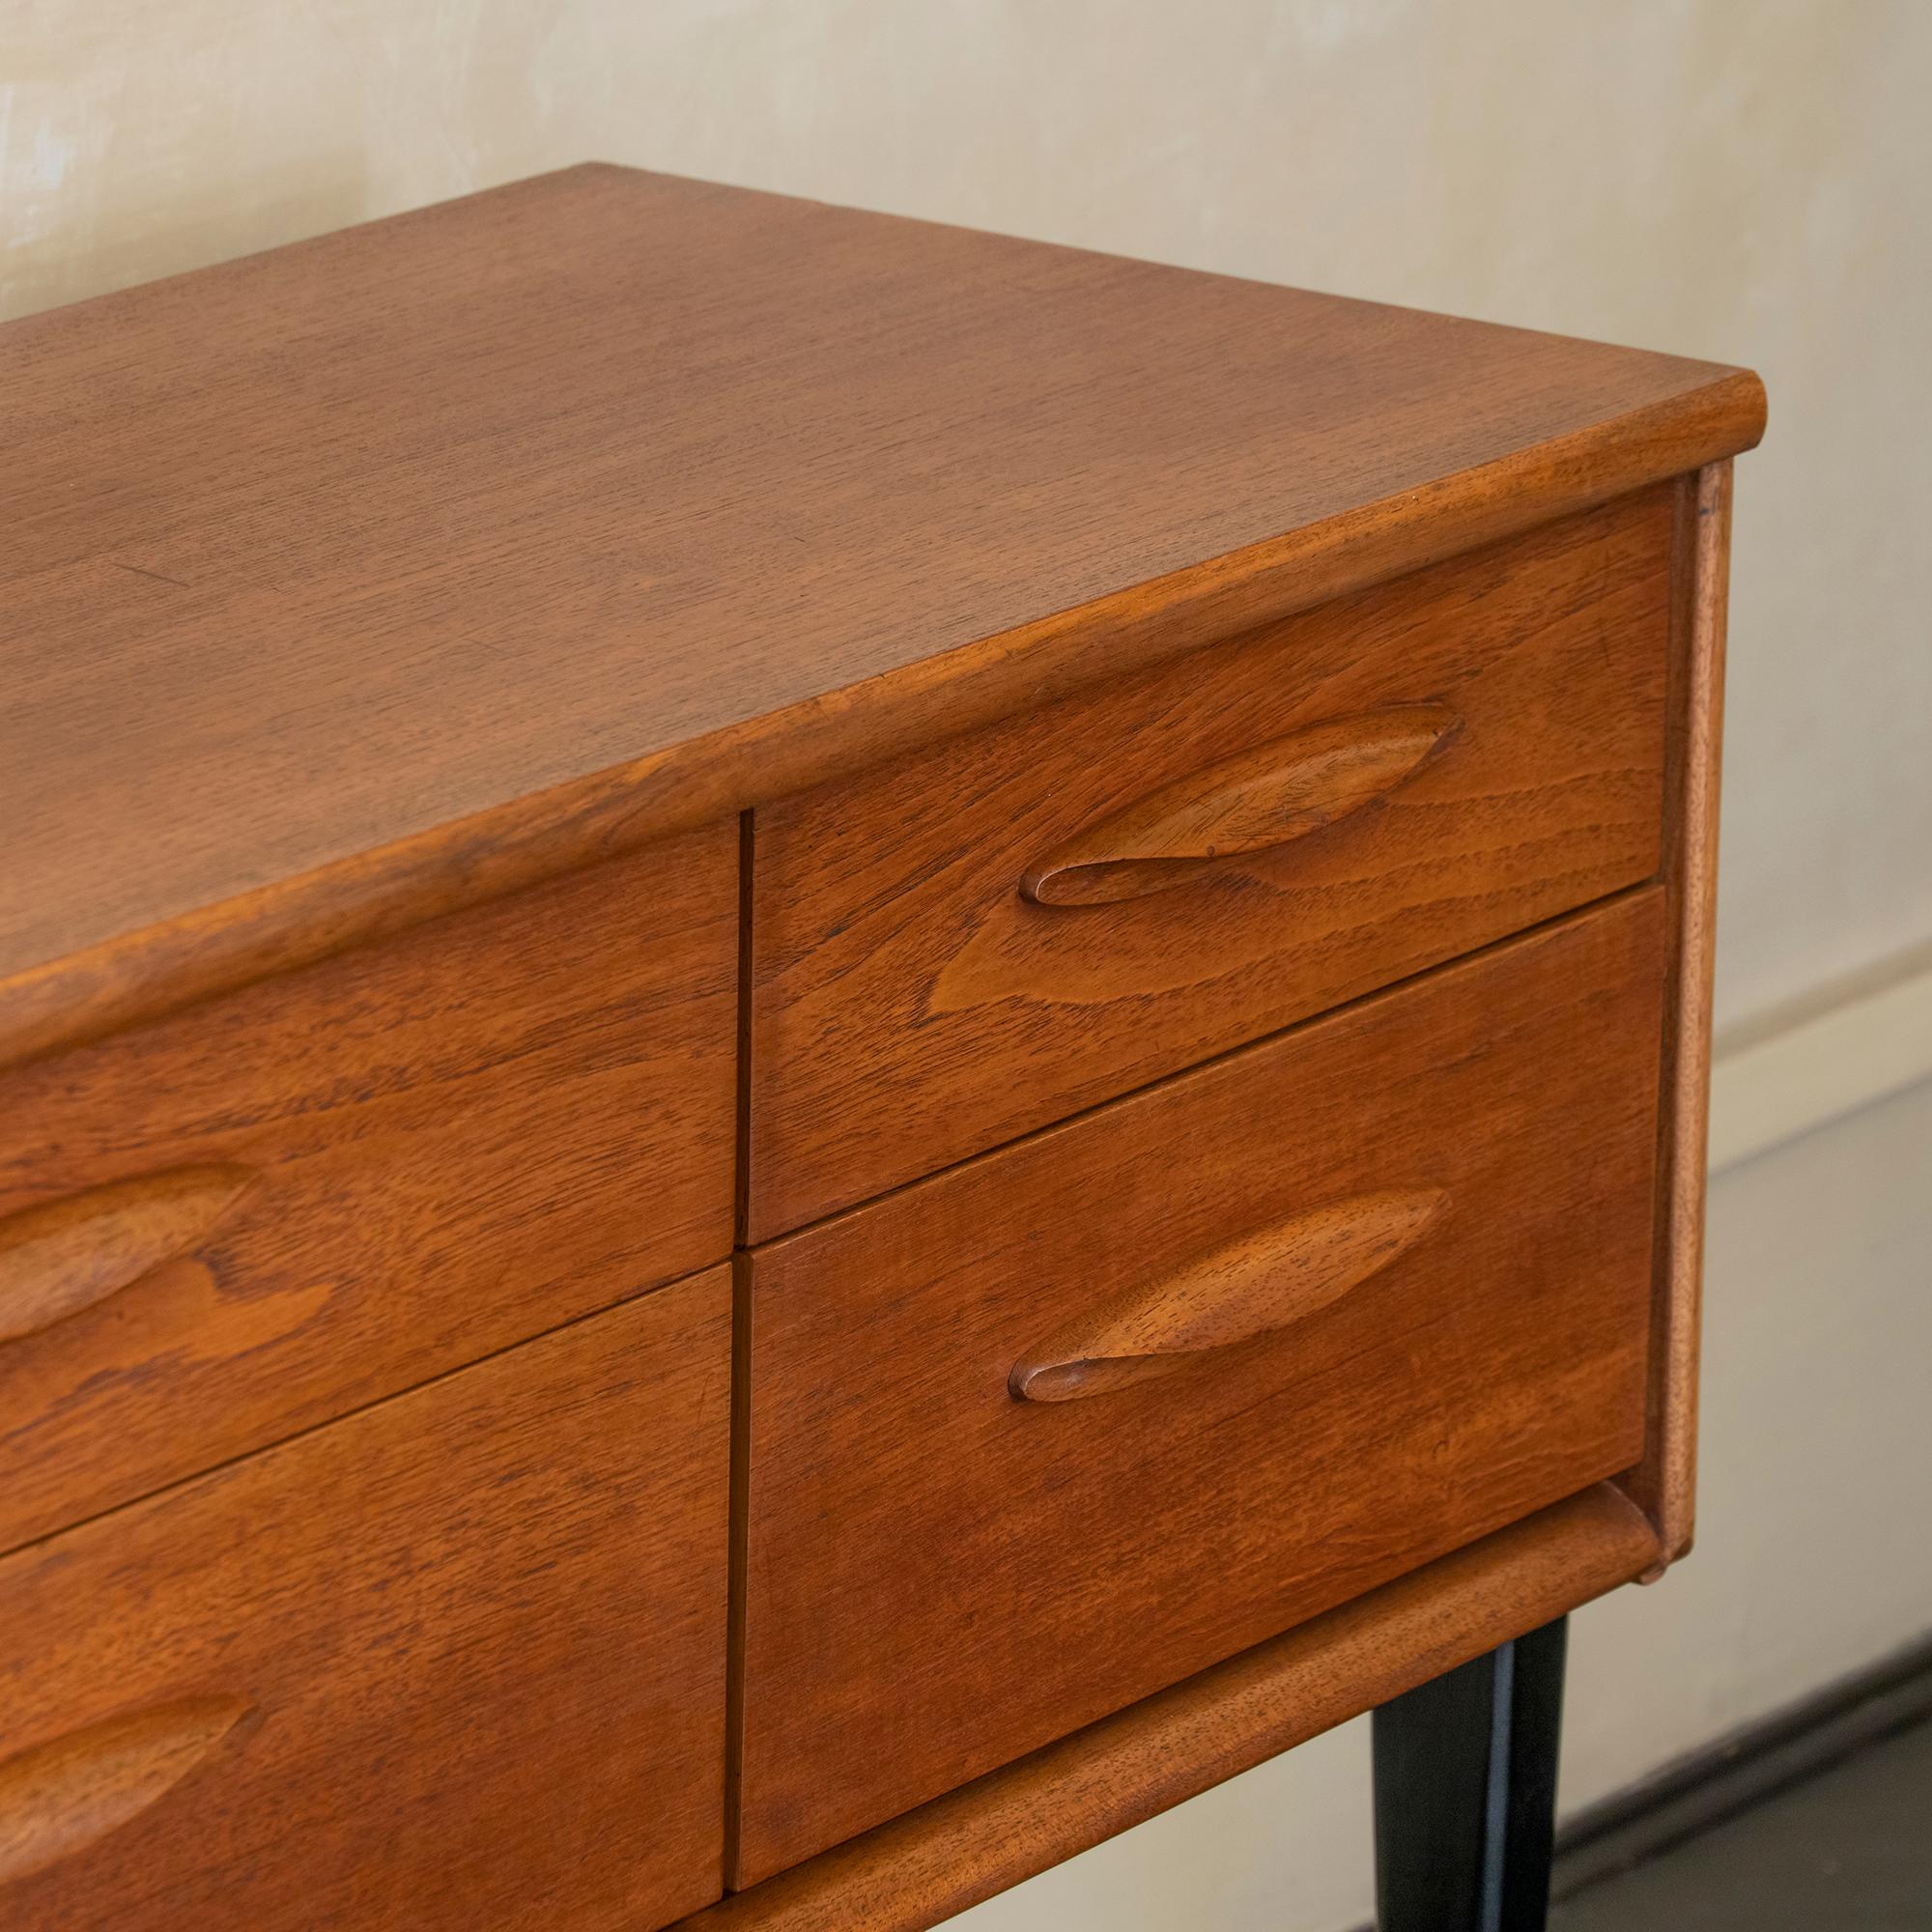 1960s English Teak Chest of Drawers by Austin Suite Ltd. For Sale 5